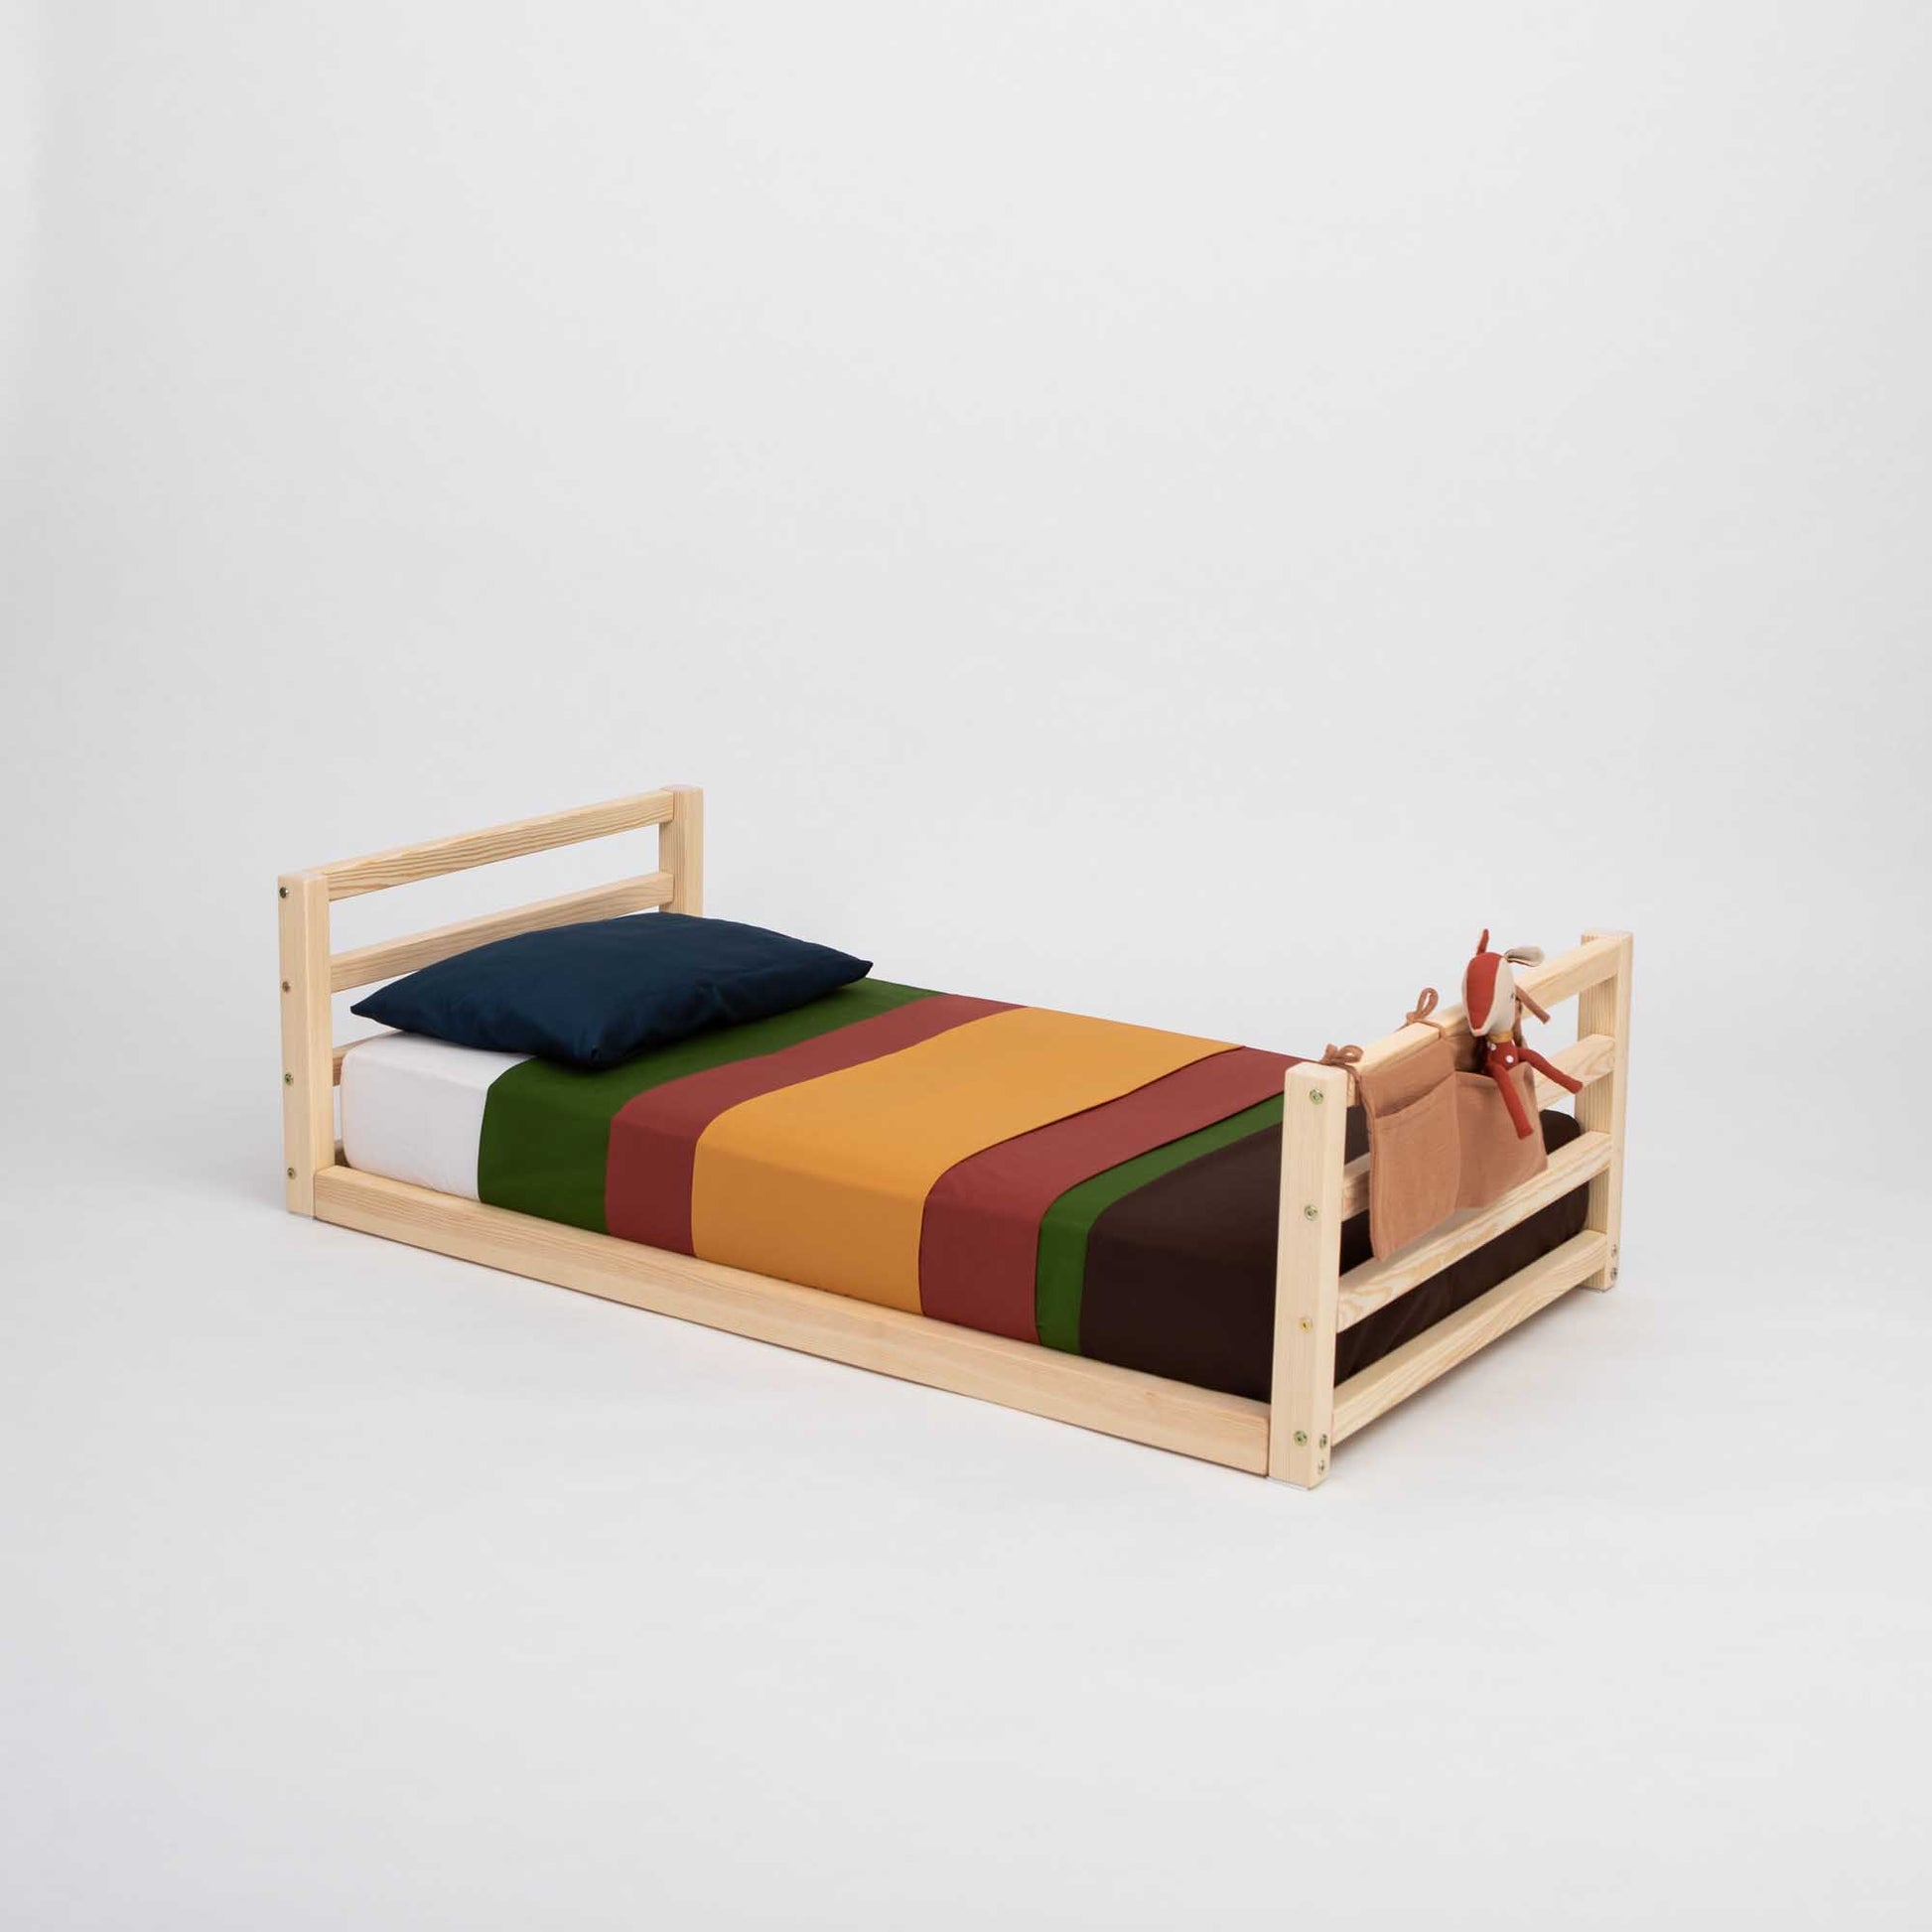 A Sweet Home From Wood 2-in-1 kids' bed with a horizontal rail headboard and footboard, with a colorful striped blanket.